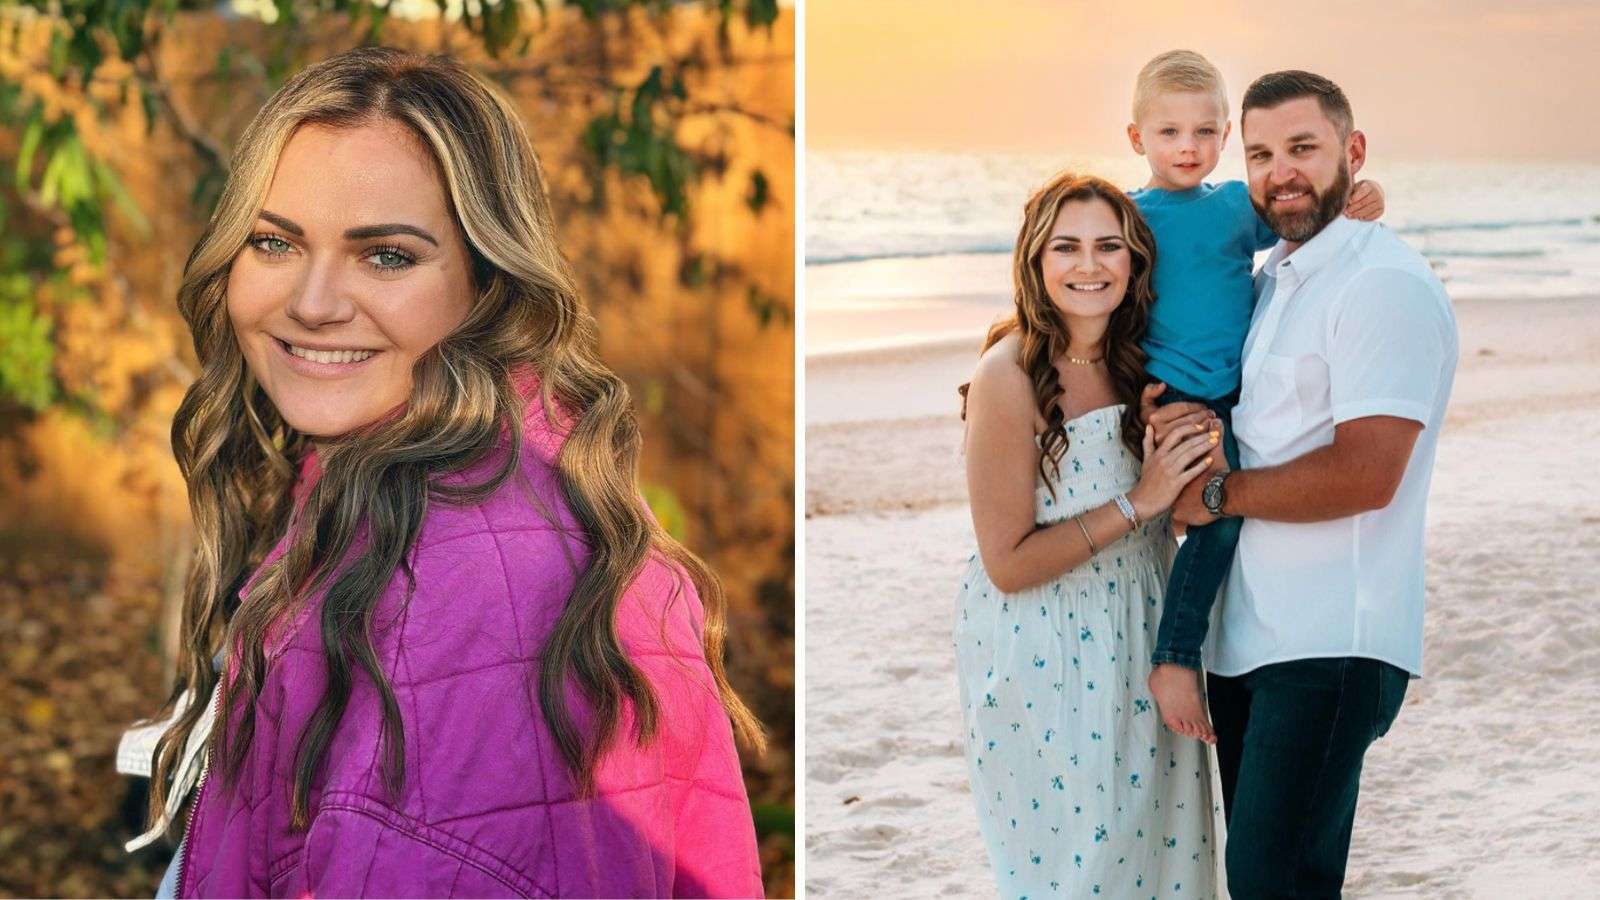 Haley Odlozil, her husband, and 4-year-old son